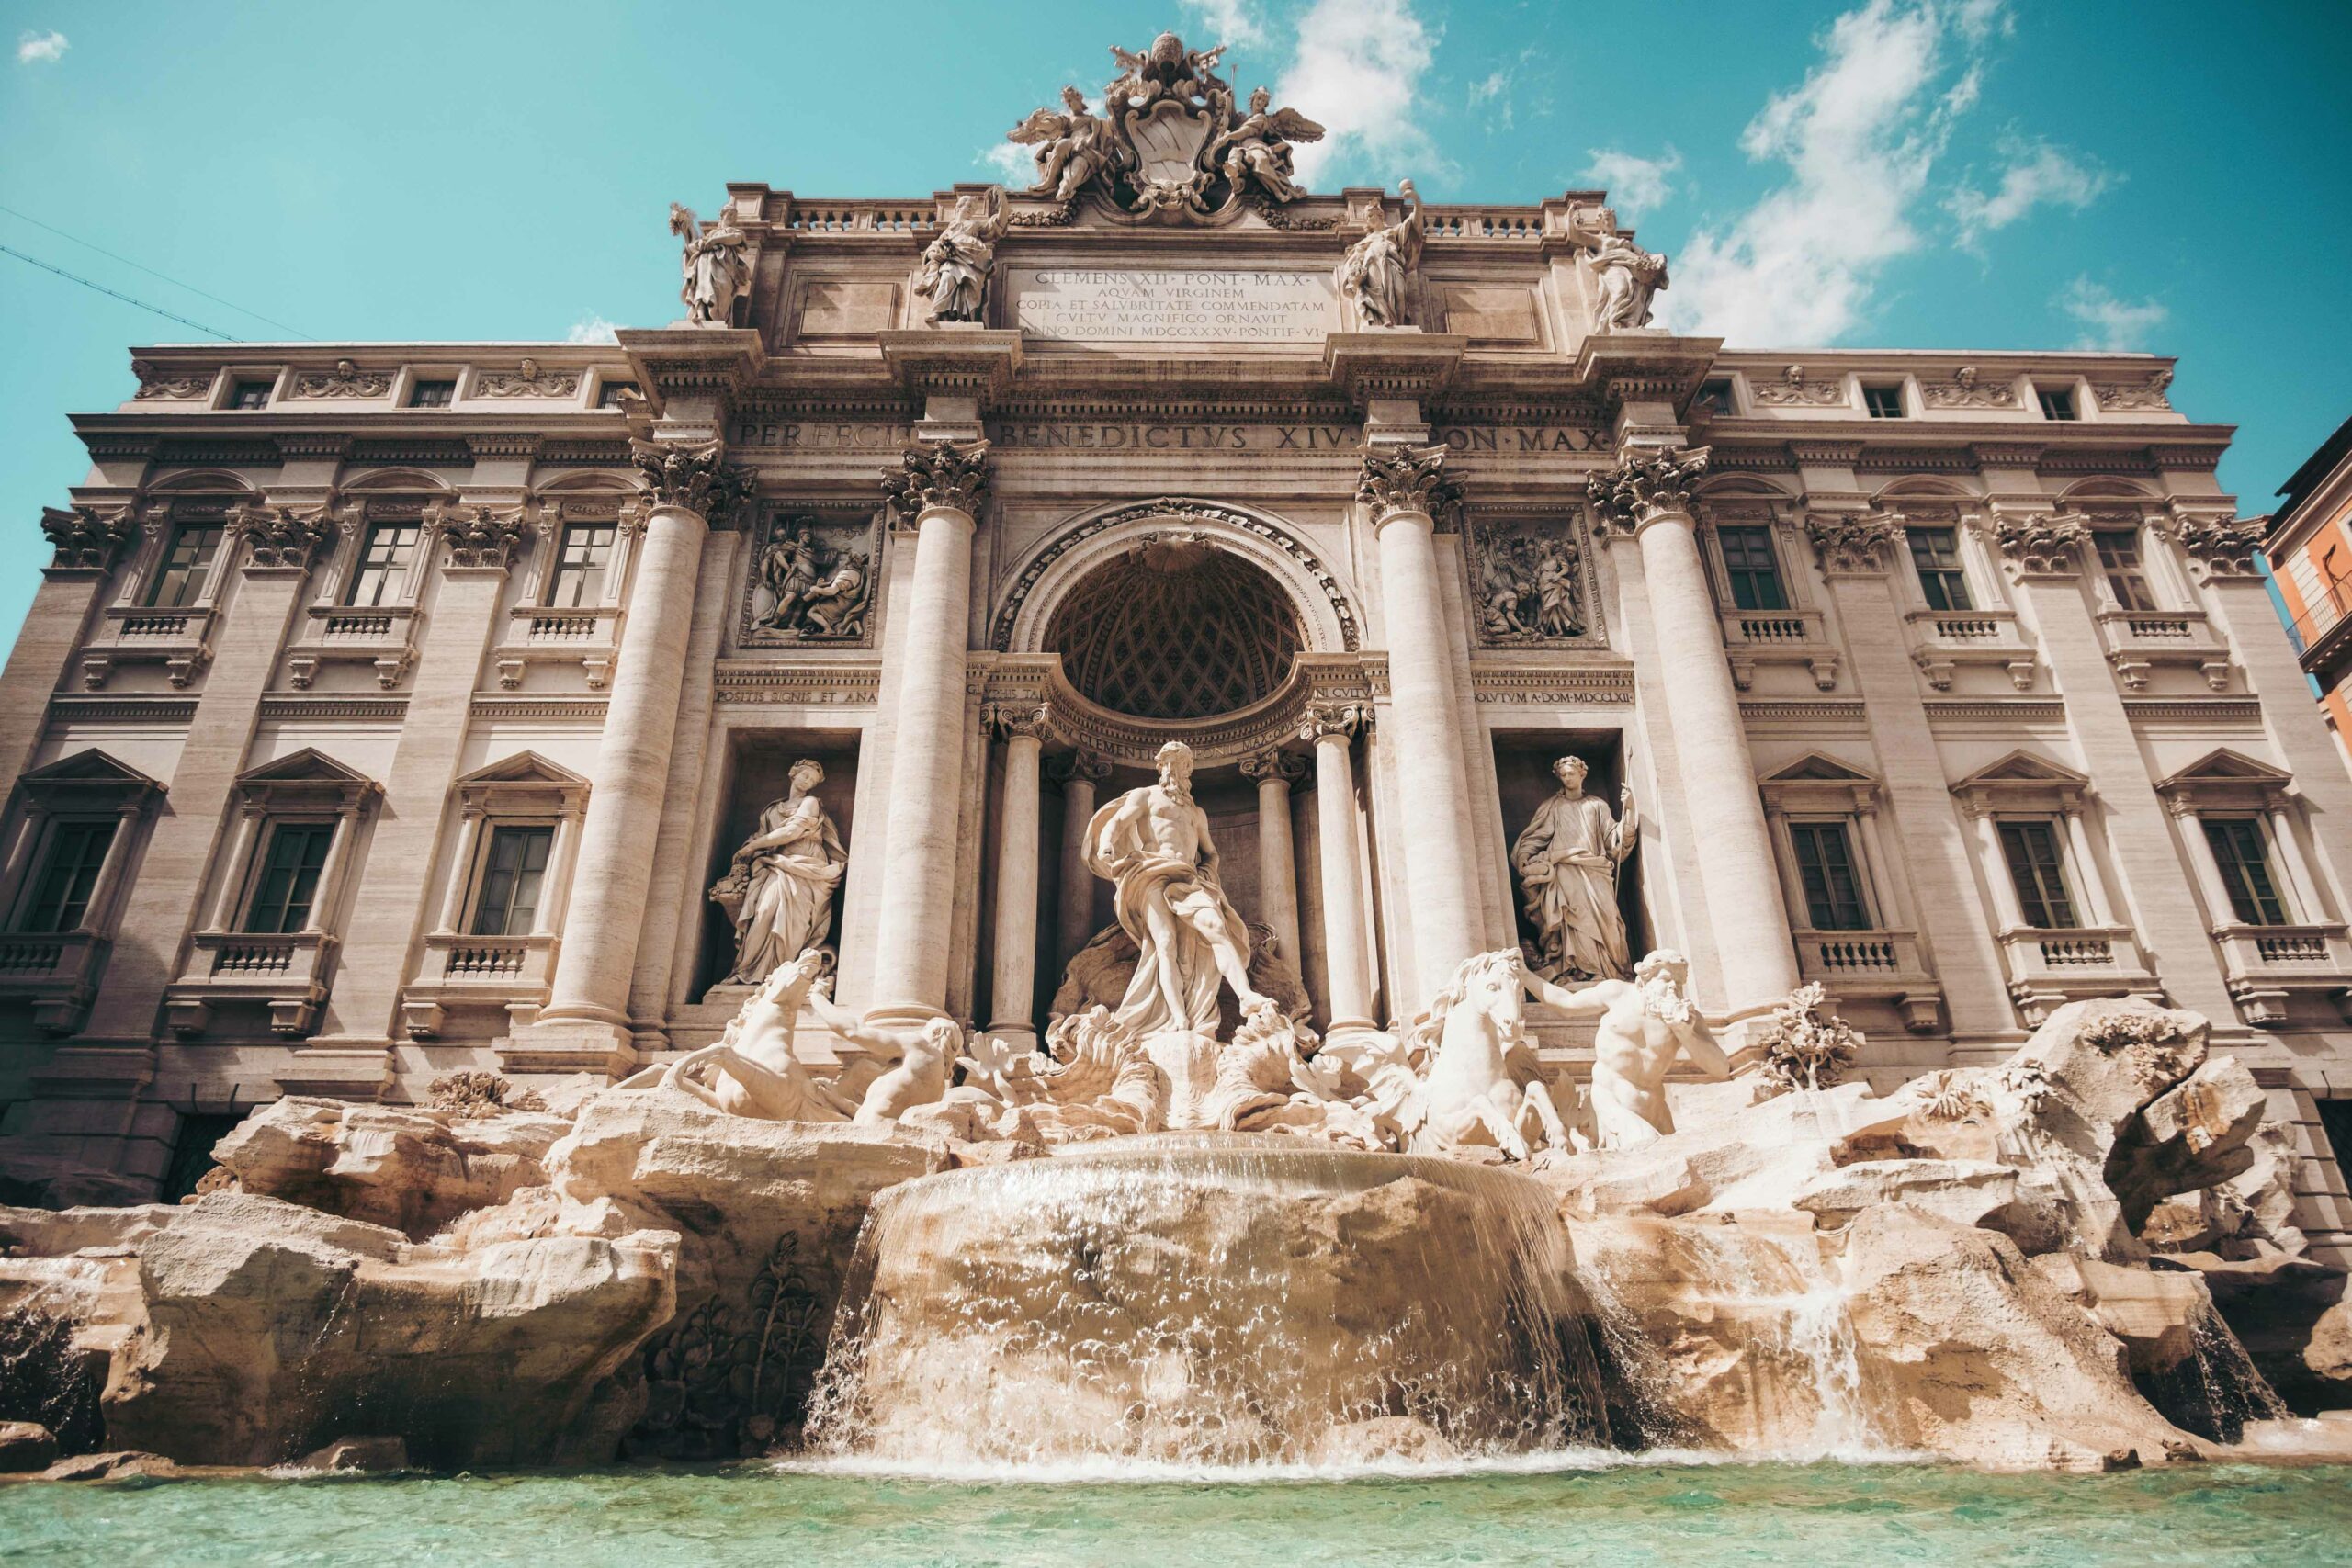 5. Trevi Fountain Scaled